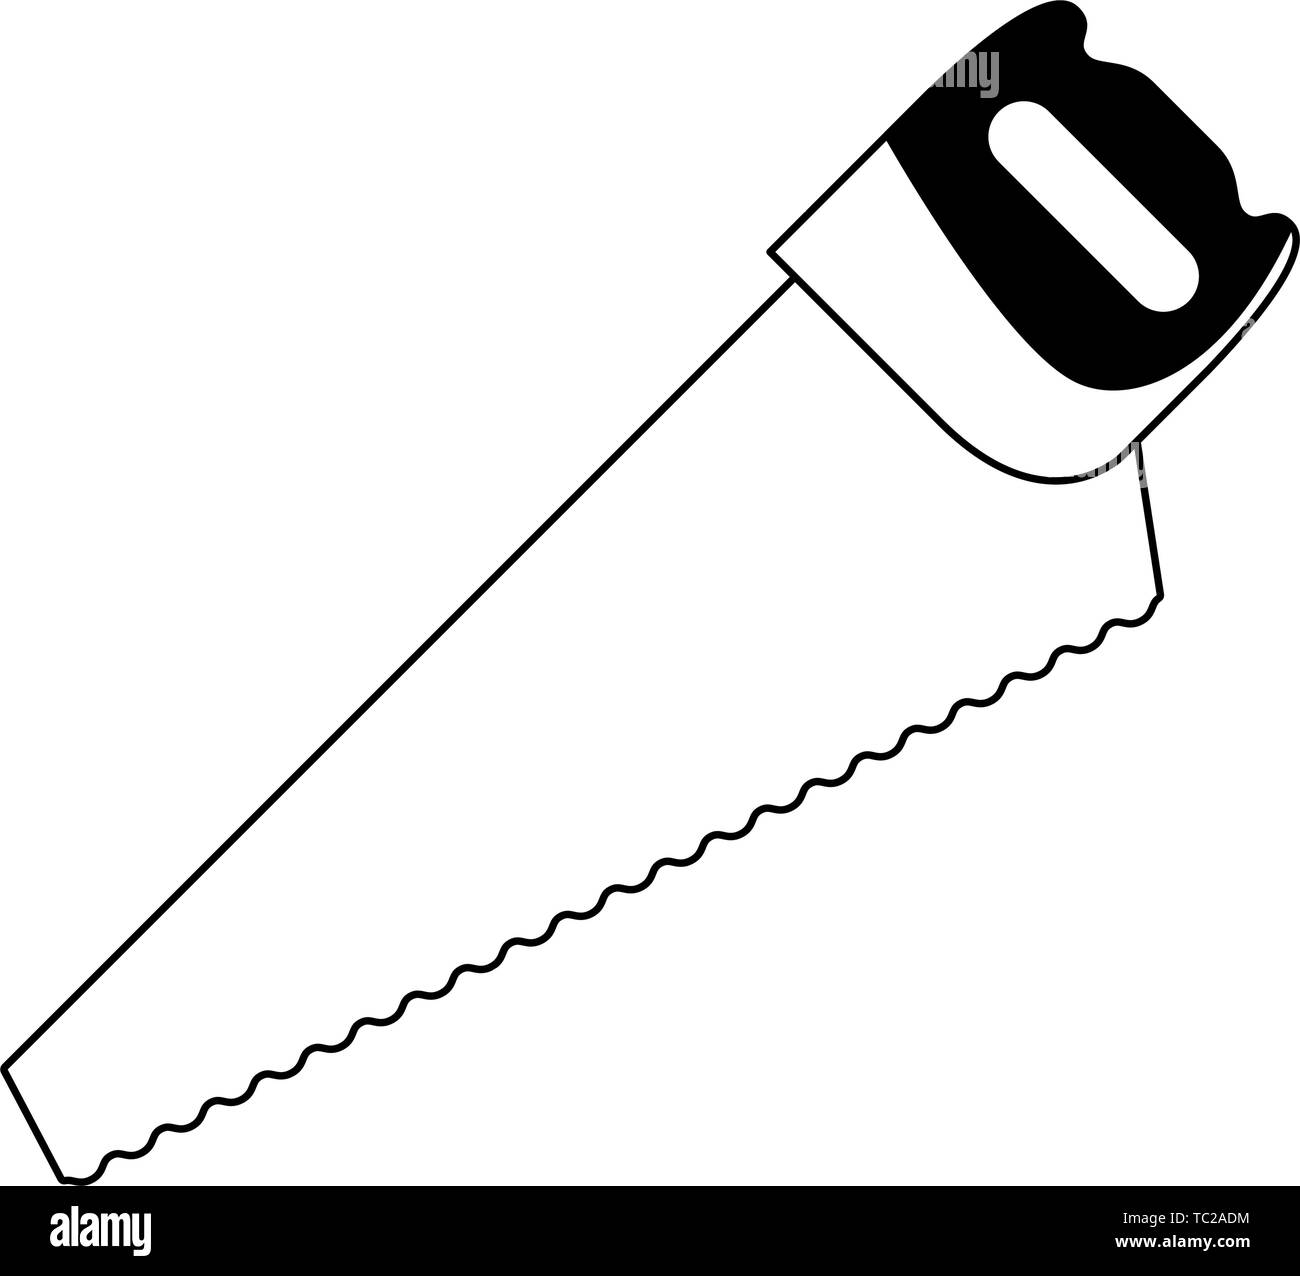 saw tool icon cartoon isolated in black and white Stock Vector